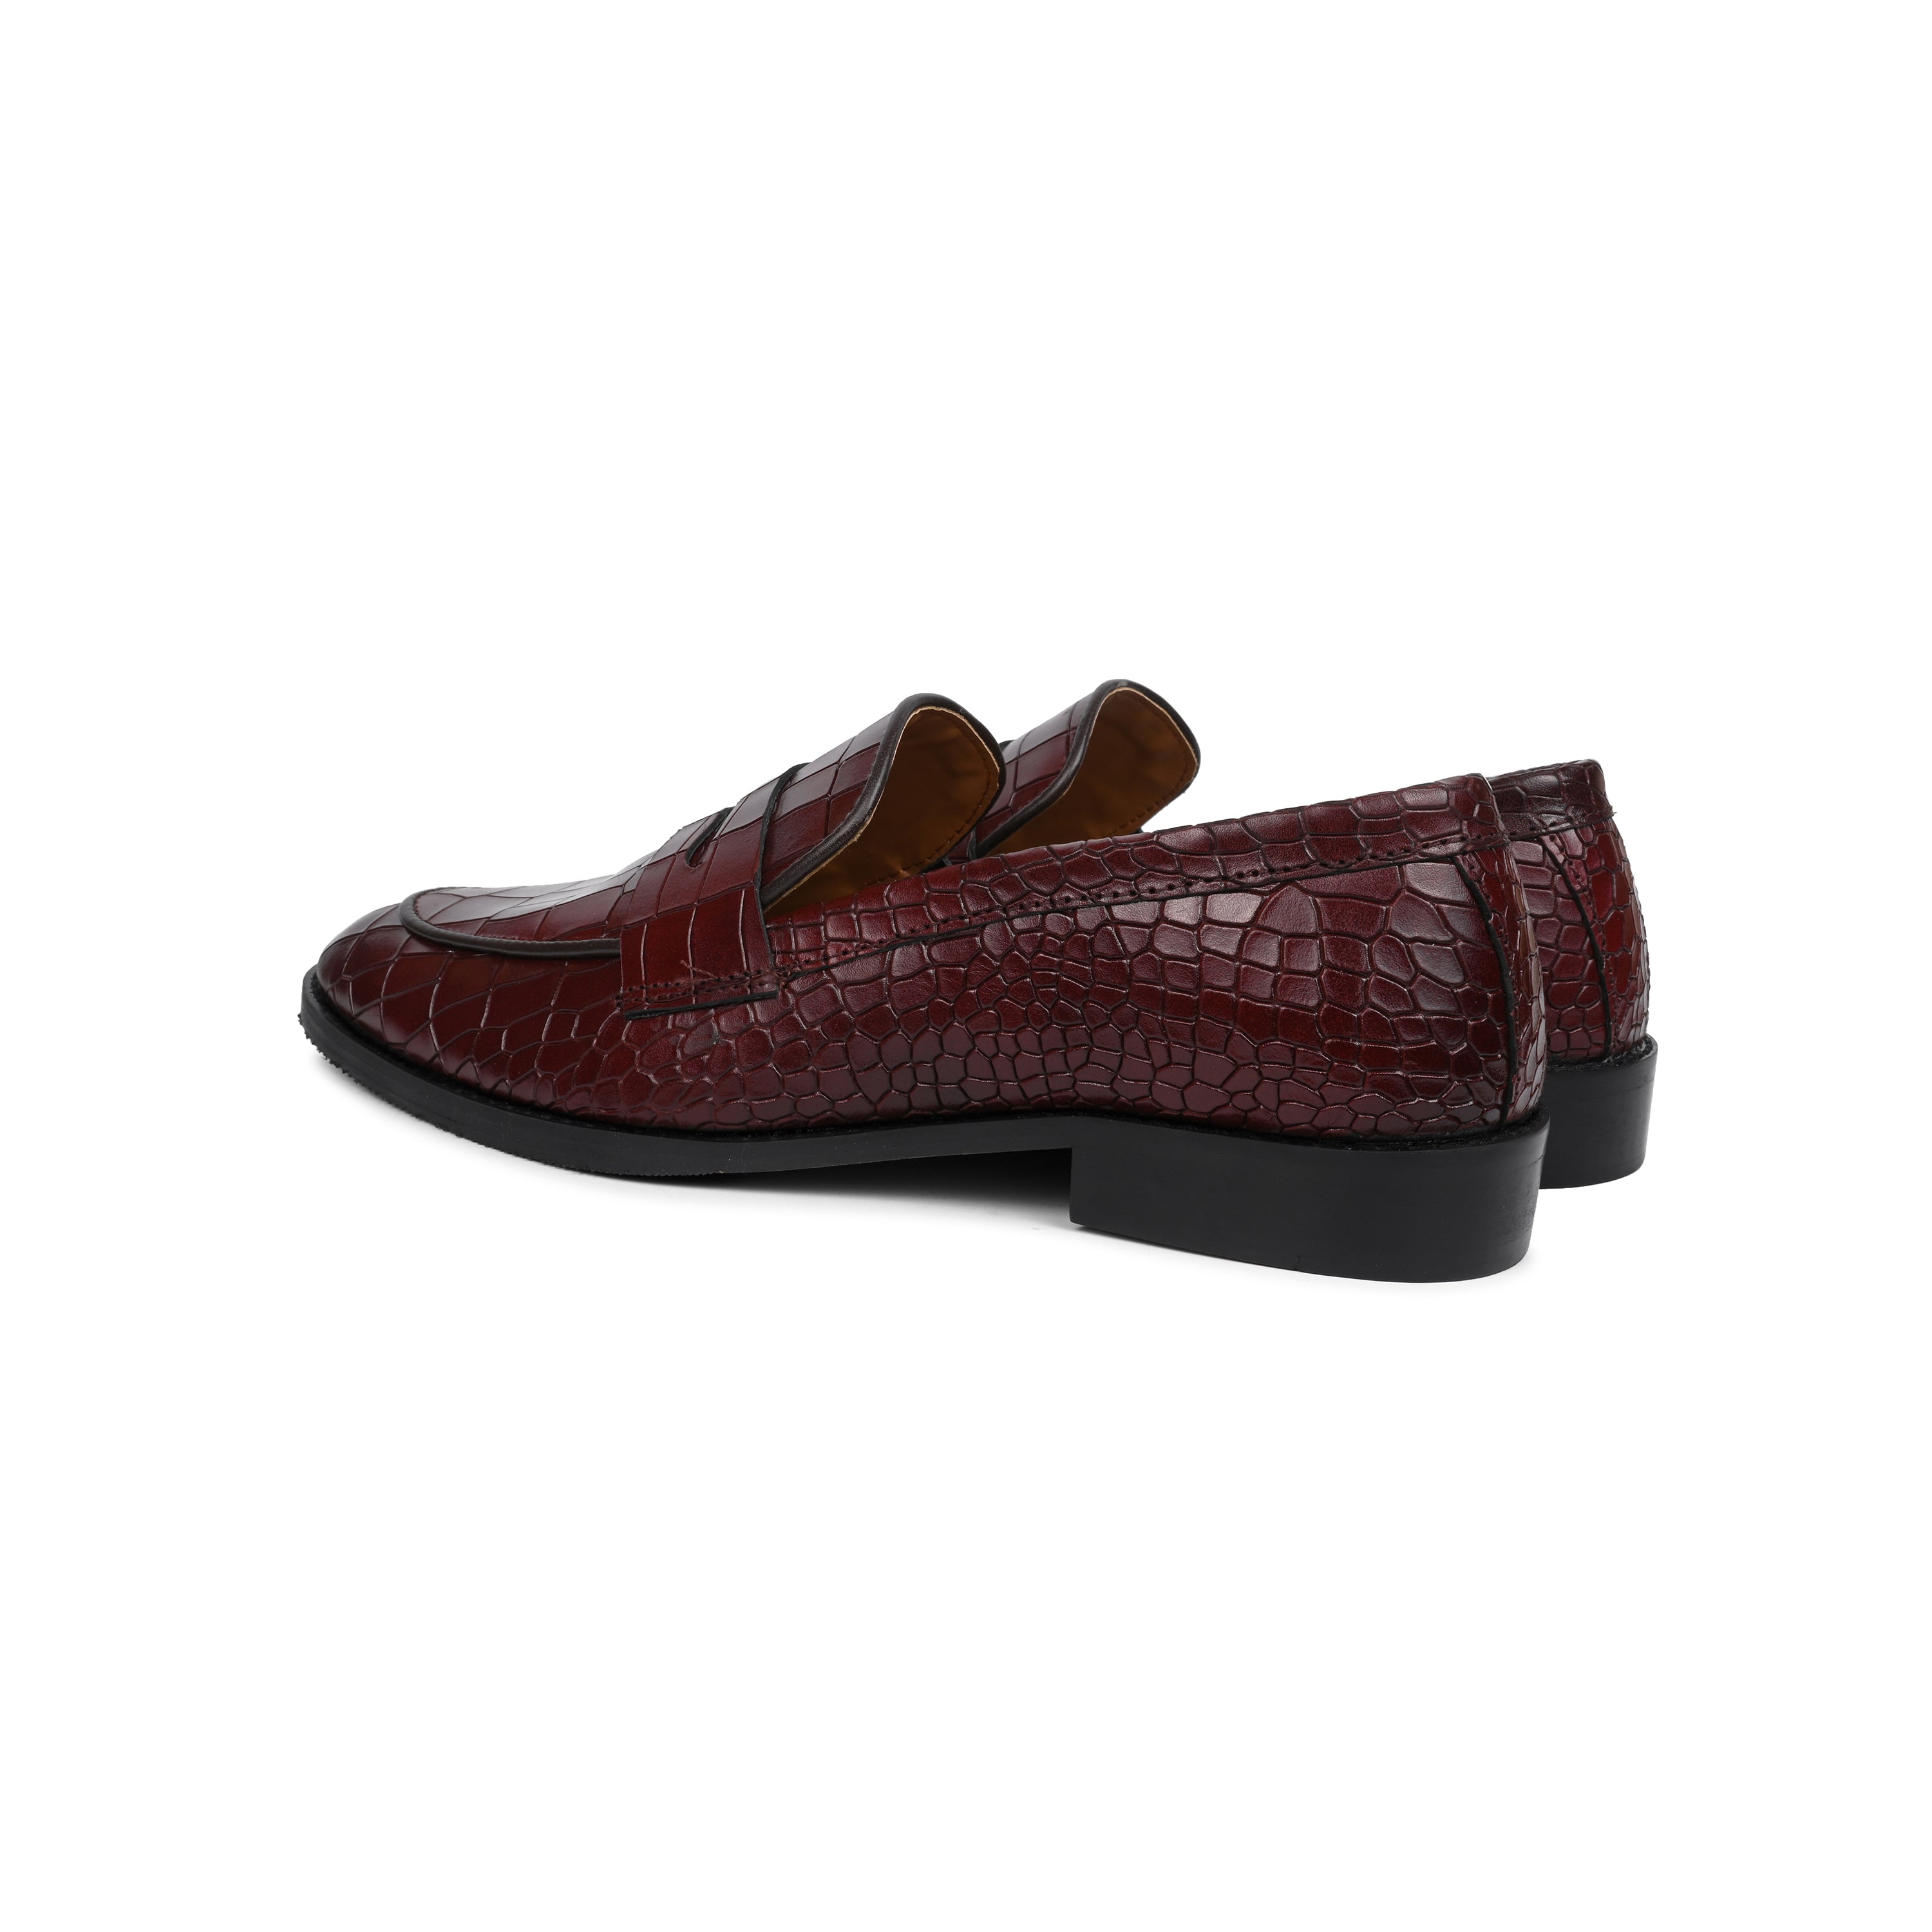 Sybil Wise Loafers